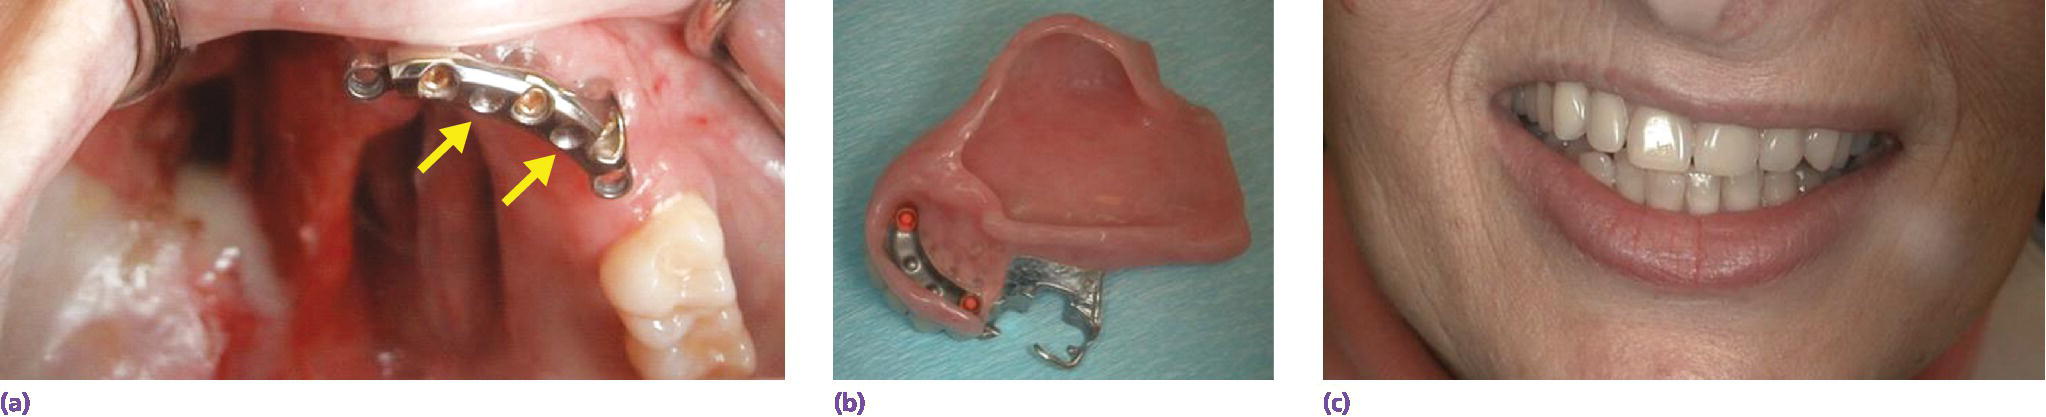 3 photos of suggested implant connecting bar design used to retain overdentures with soft palate obturators: position of implants, anterior segment of implant connecting bar, and patient with soft palate defect.